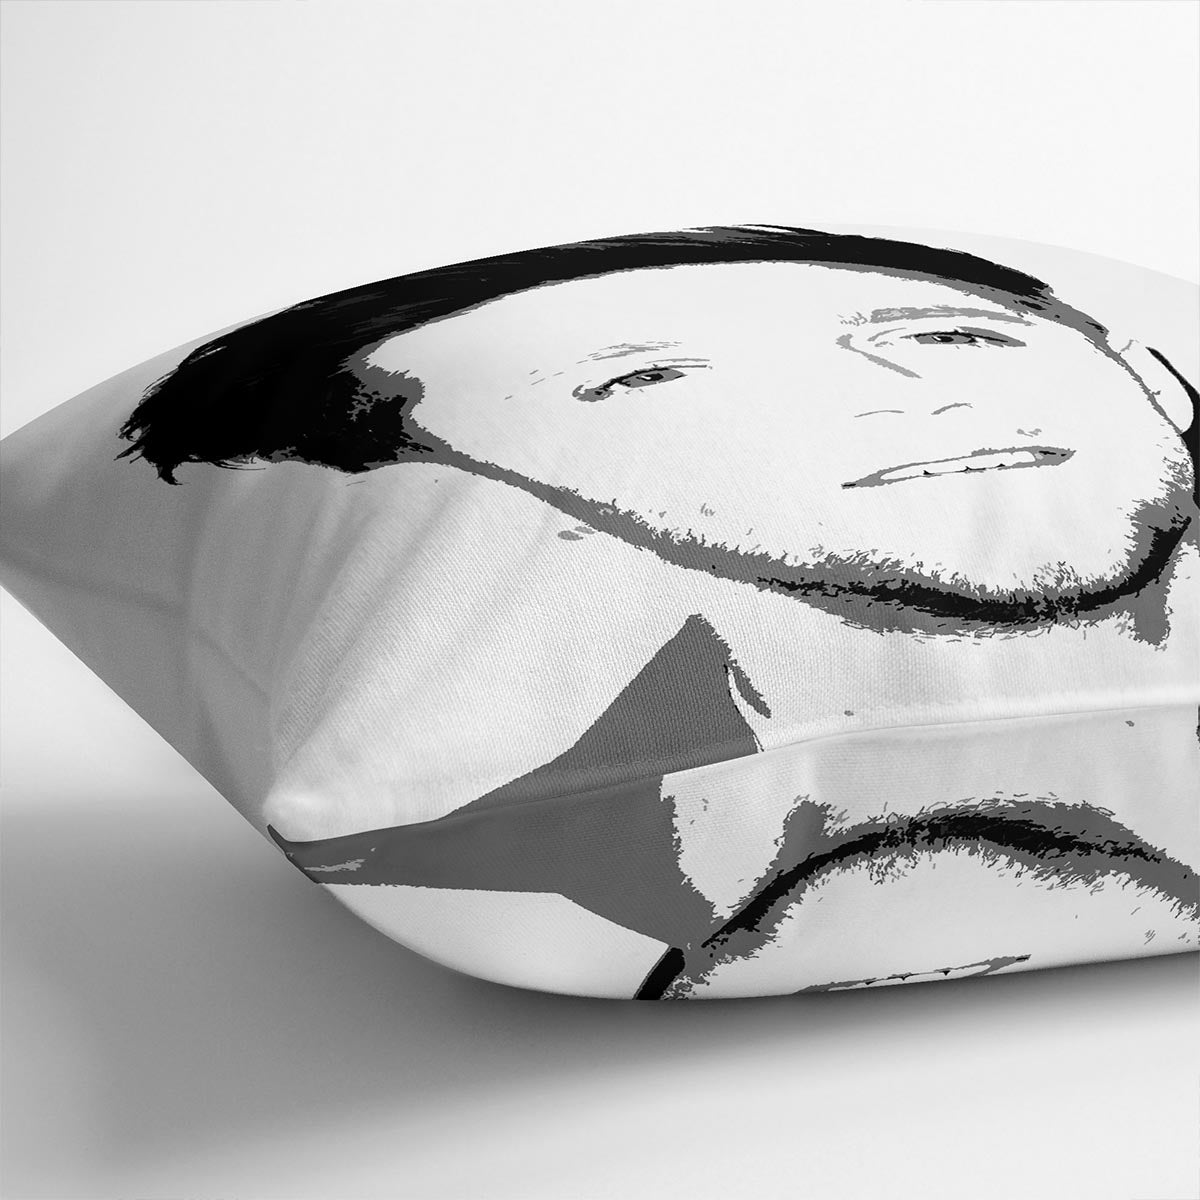 Niall Horan of One Direction Black and White Pop Art Cushion